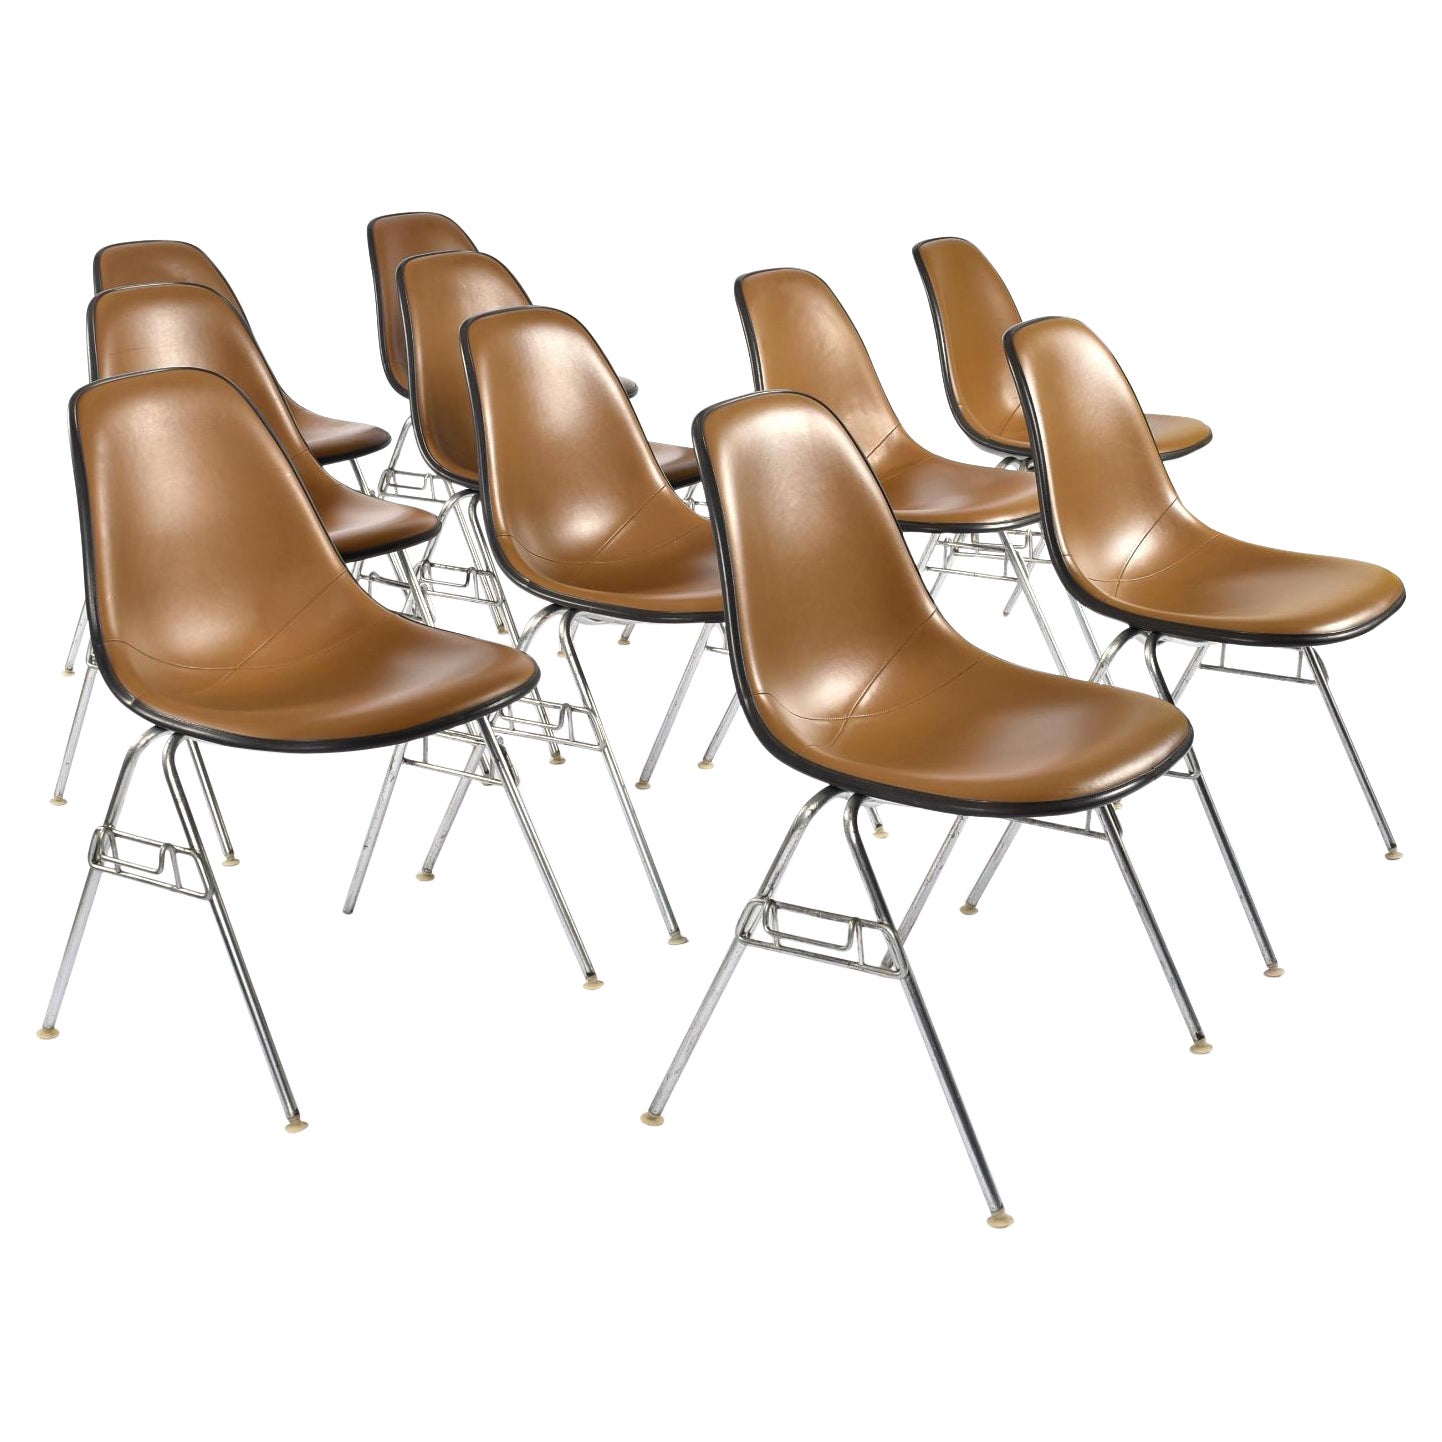 What is a Herman Miller chair?